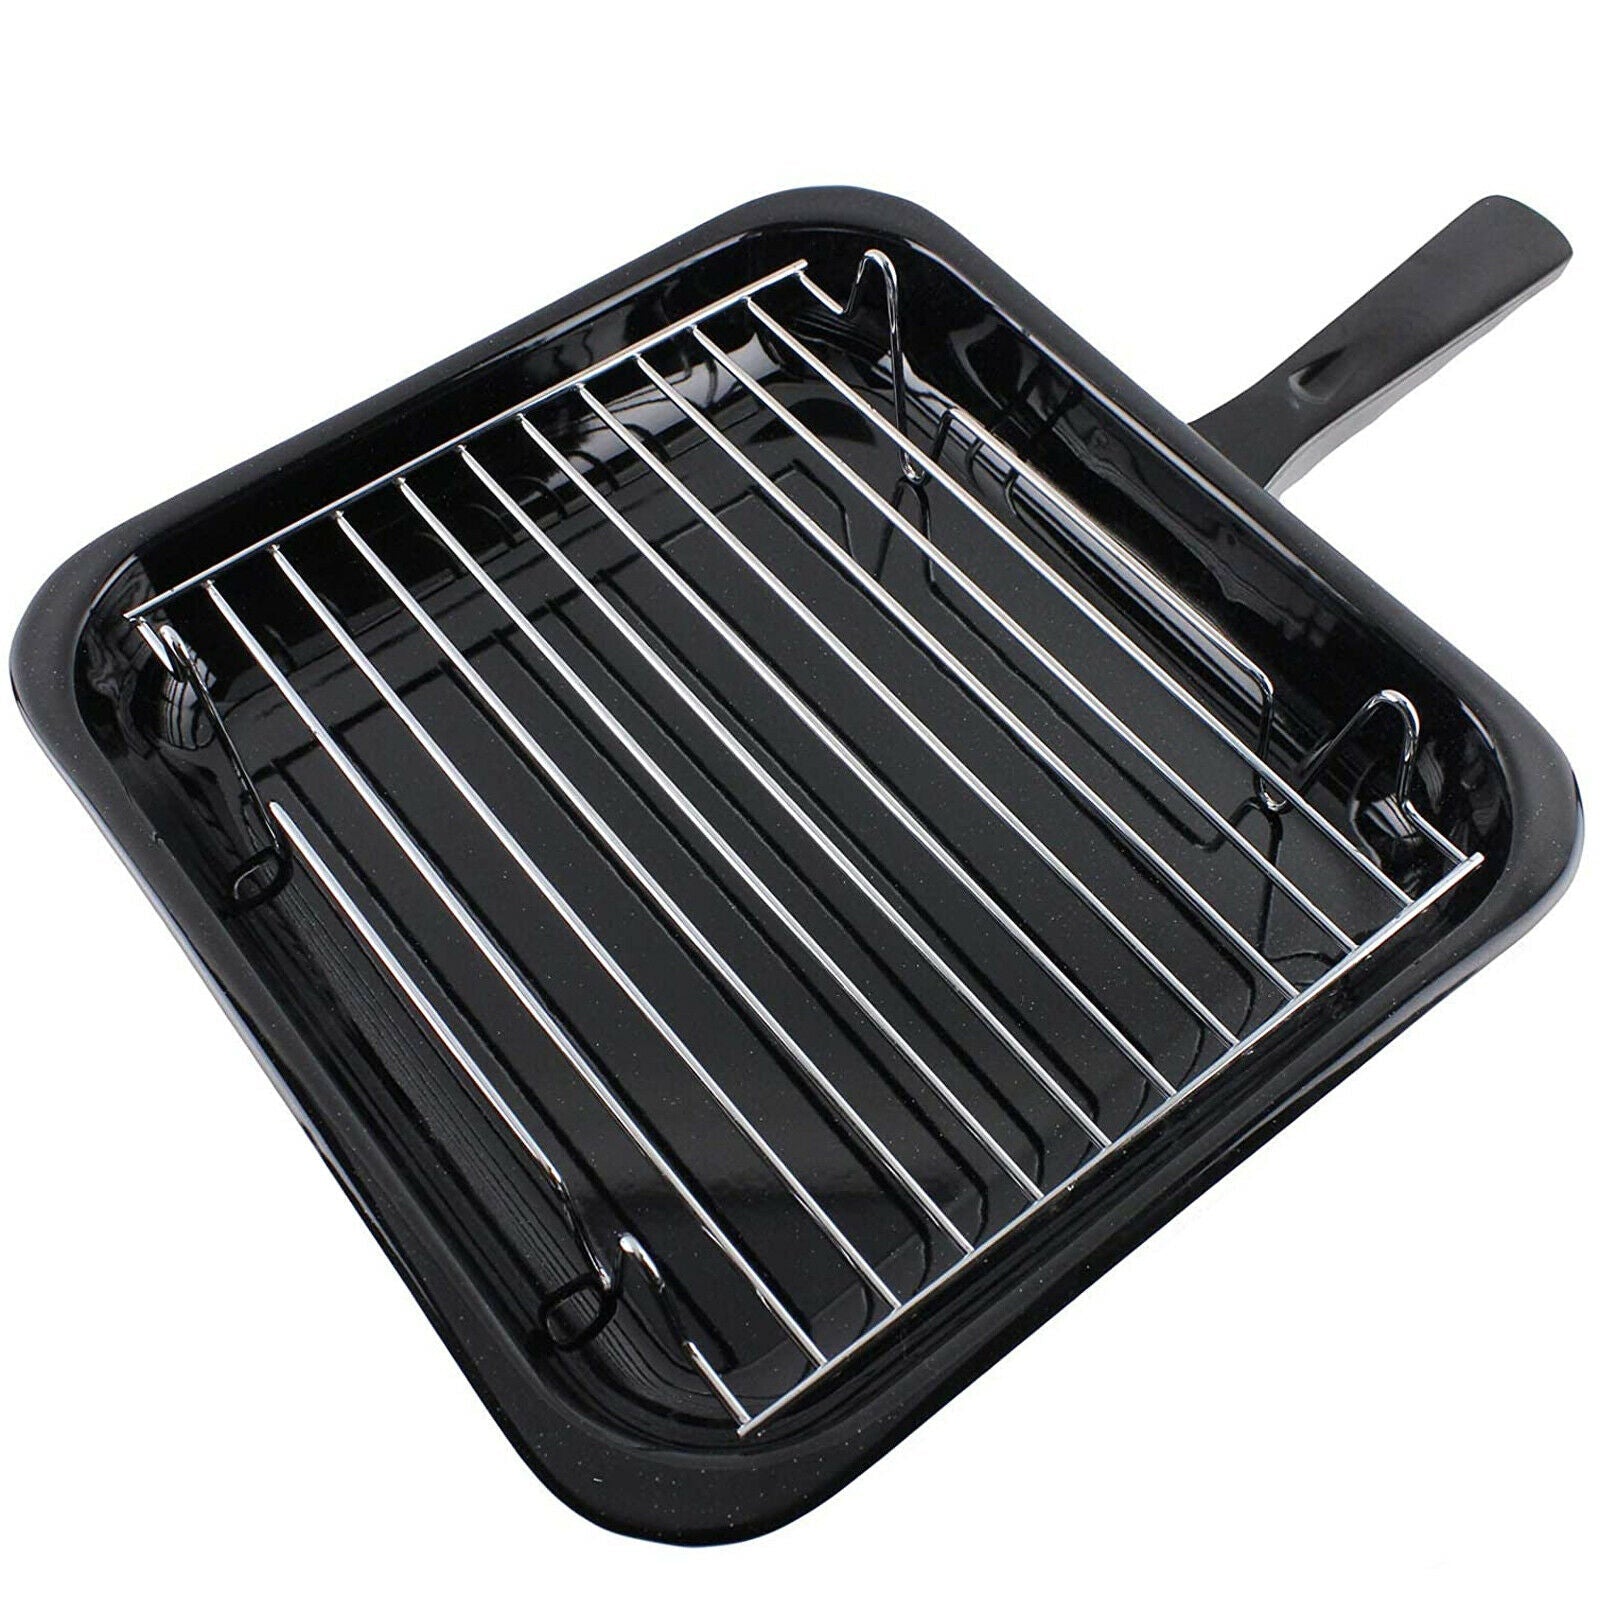 Small square grill pan, rack and detachable handle for use with all Neff ovens/cookers/grills